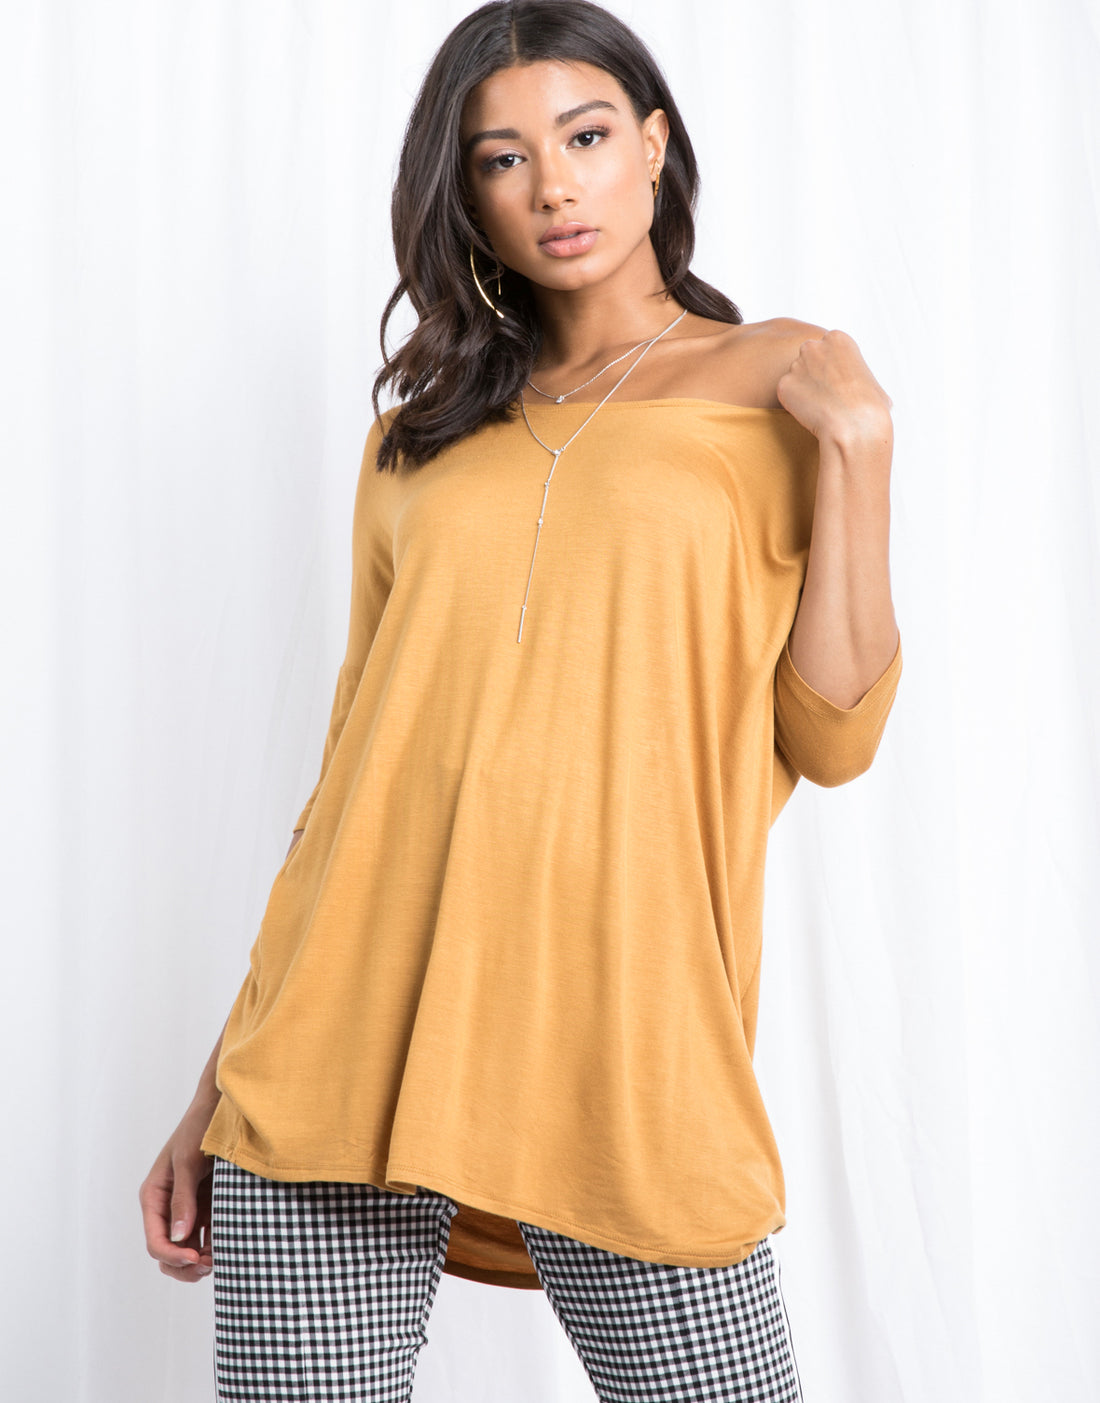 Second Skin Oversized Tee Tops Mustard Small -2020AVE